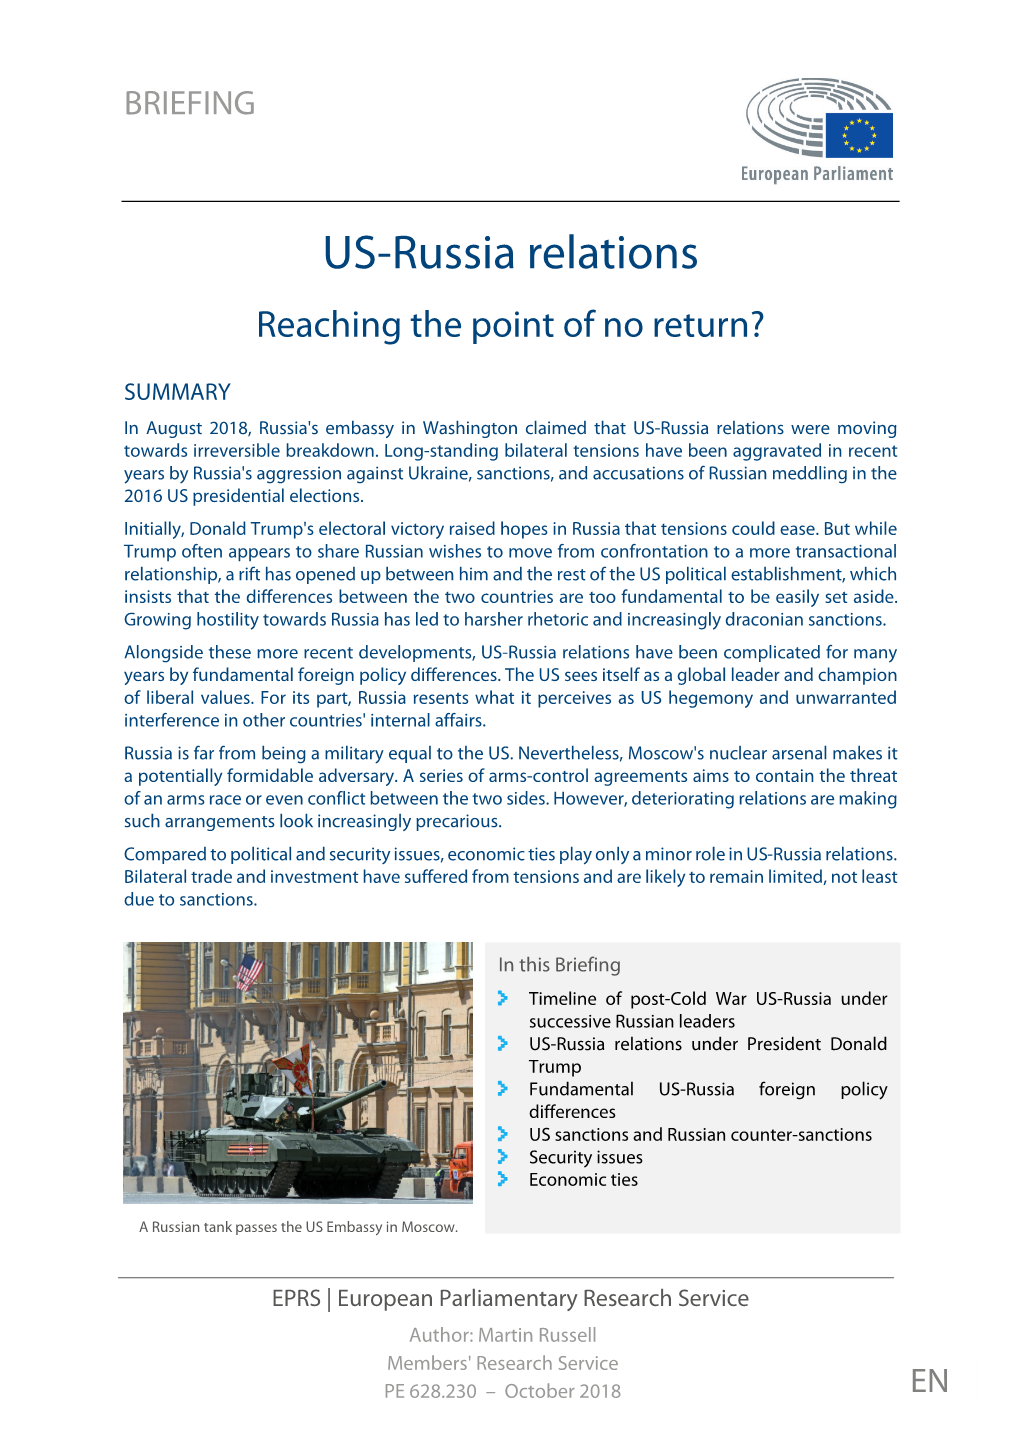 US-Russia Relations Reaching the Point of No Return?